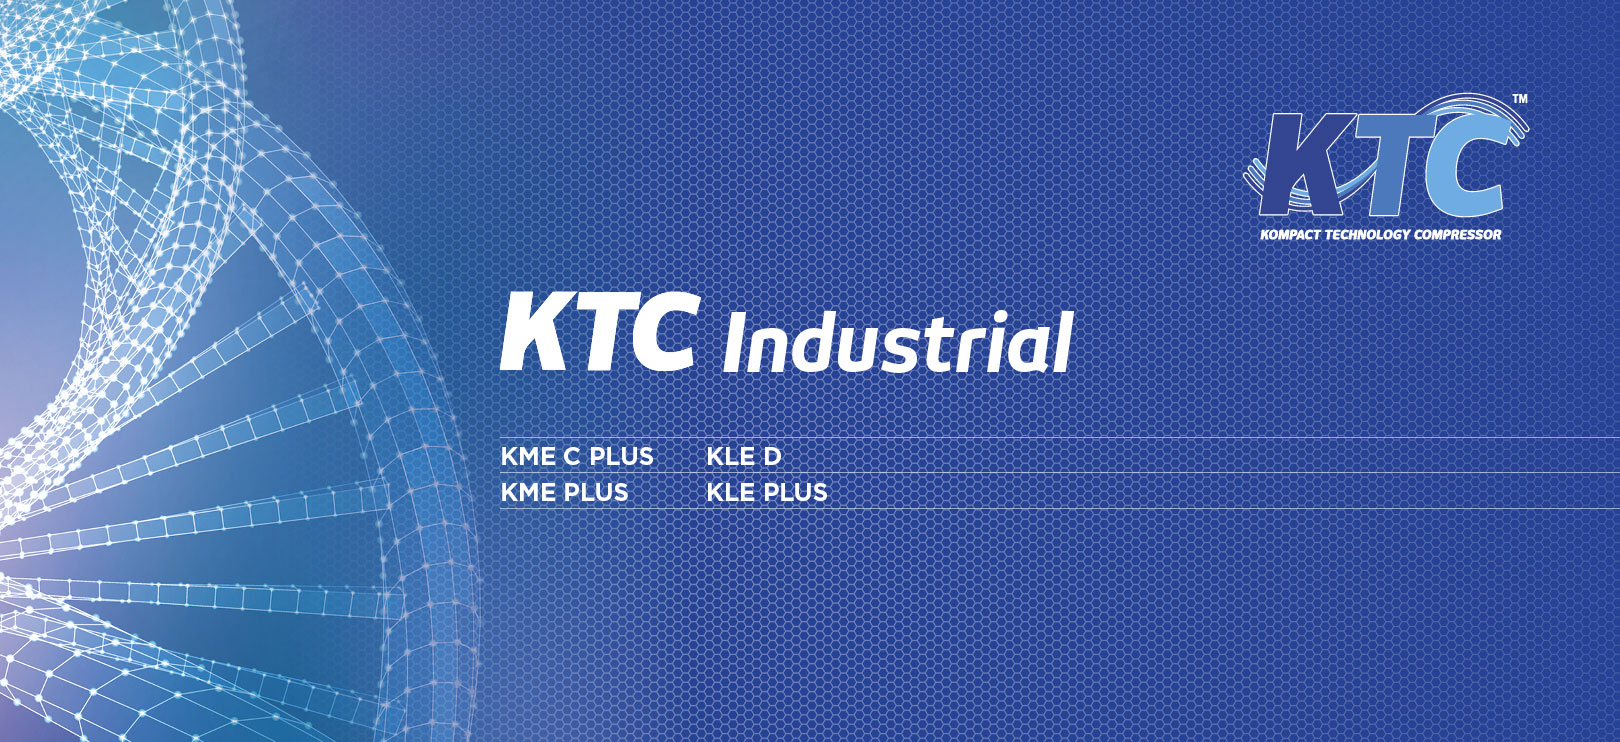 Ktc KT CONSULTING